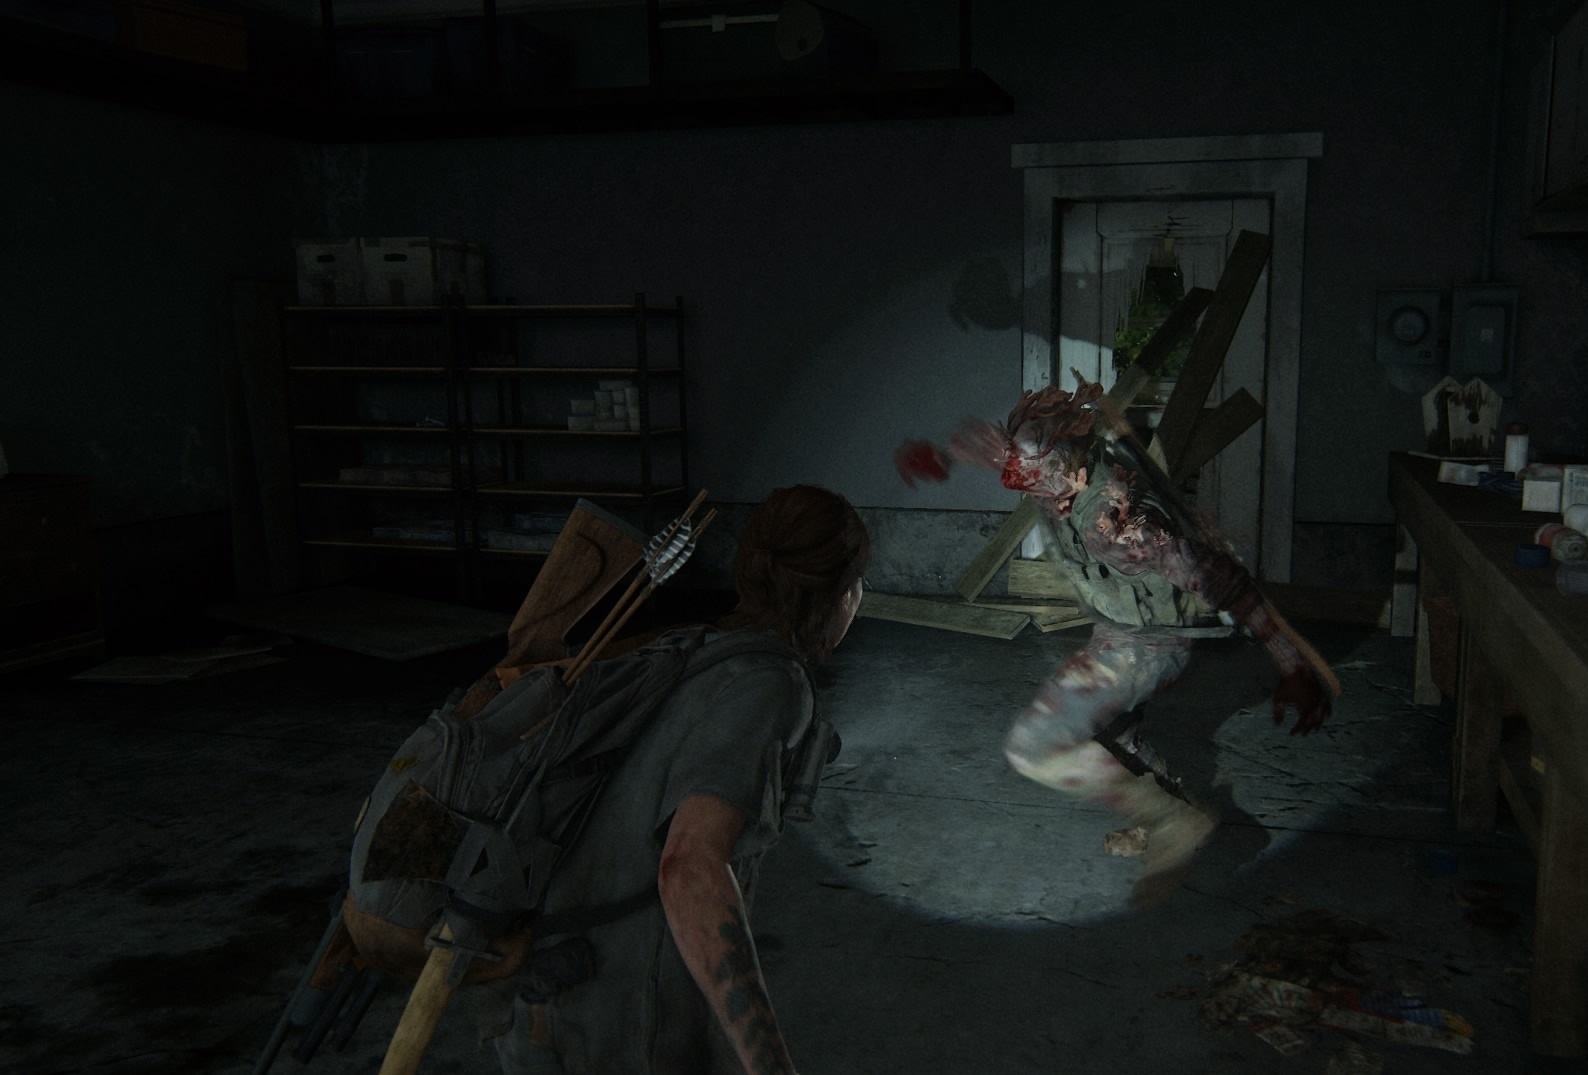 The Last Of Us Review: Season 1, Episode 2 “Infected”